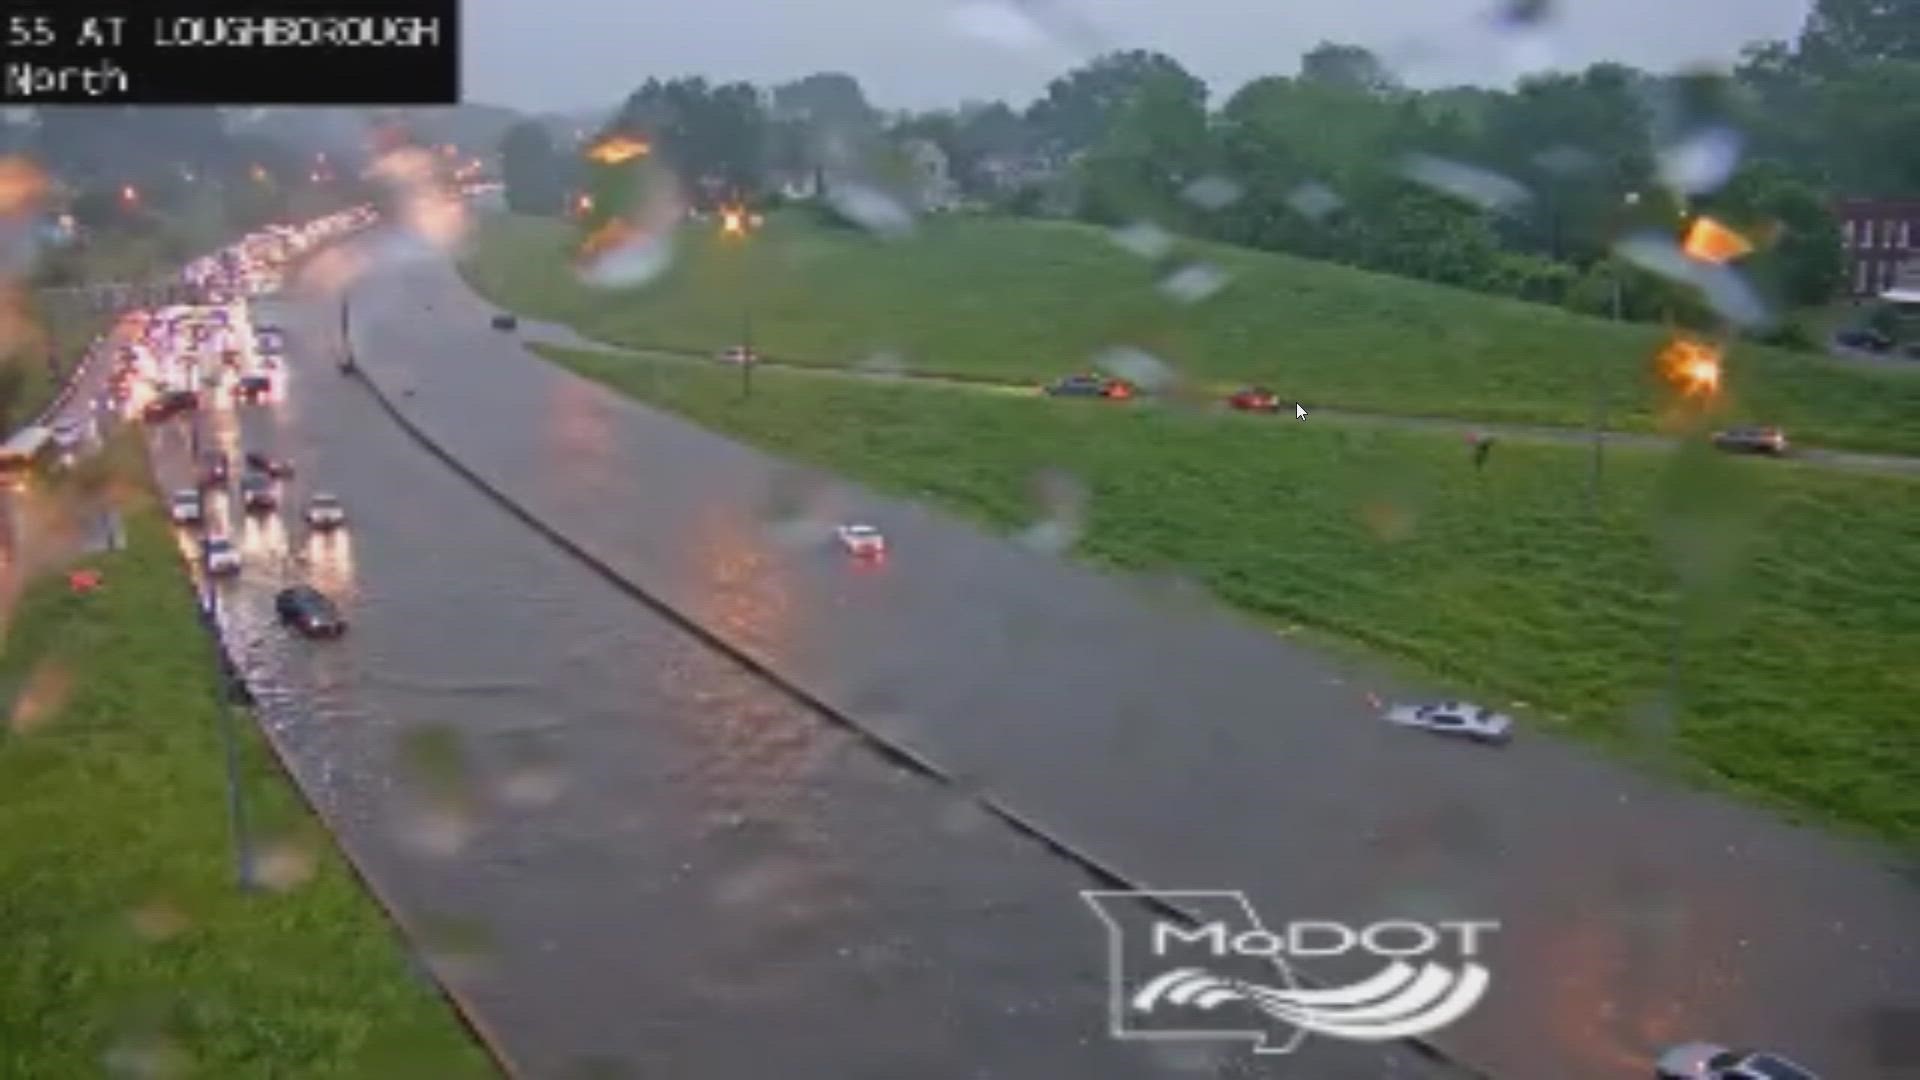 Cars were stranded on the interstate after heavy rain. The interstate was impassable.